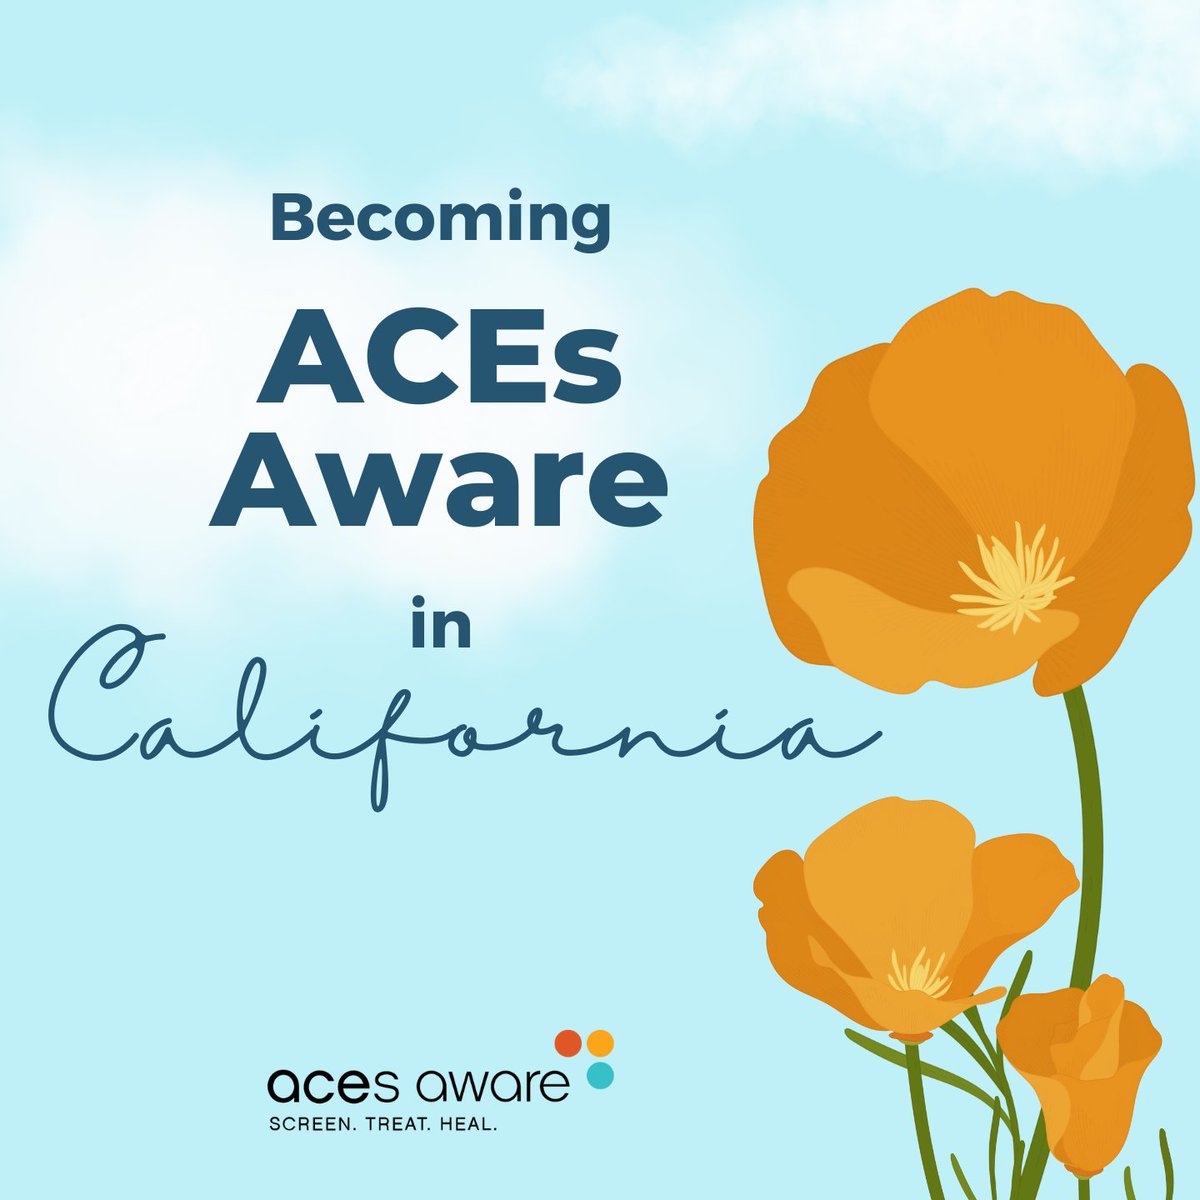 All health care teams, community workers, & educators in settings where children, adults & families receive health care or supportive community services can benefit from taking the Becoming @ACEsAware in CA training: training.acesaware.org/aa